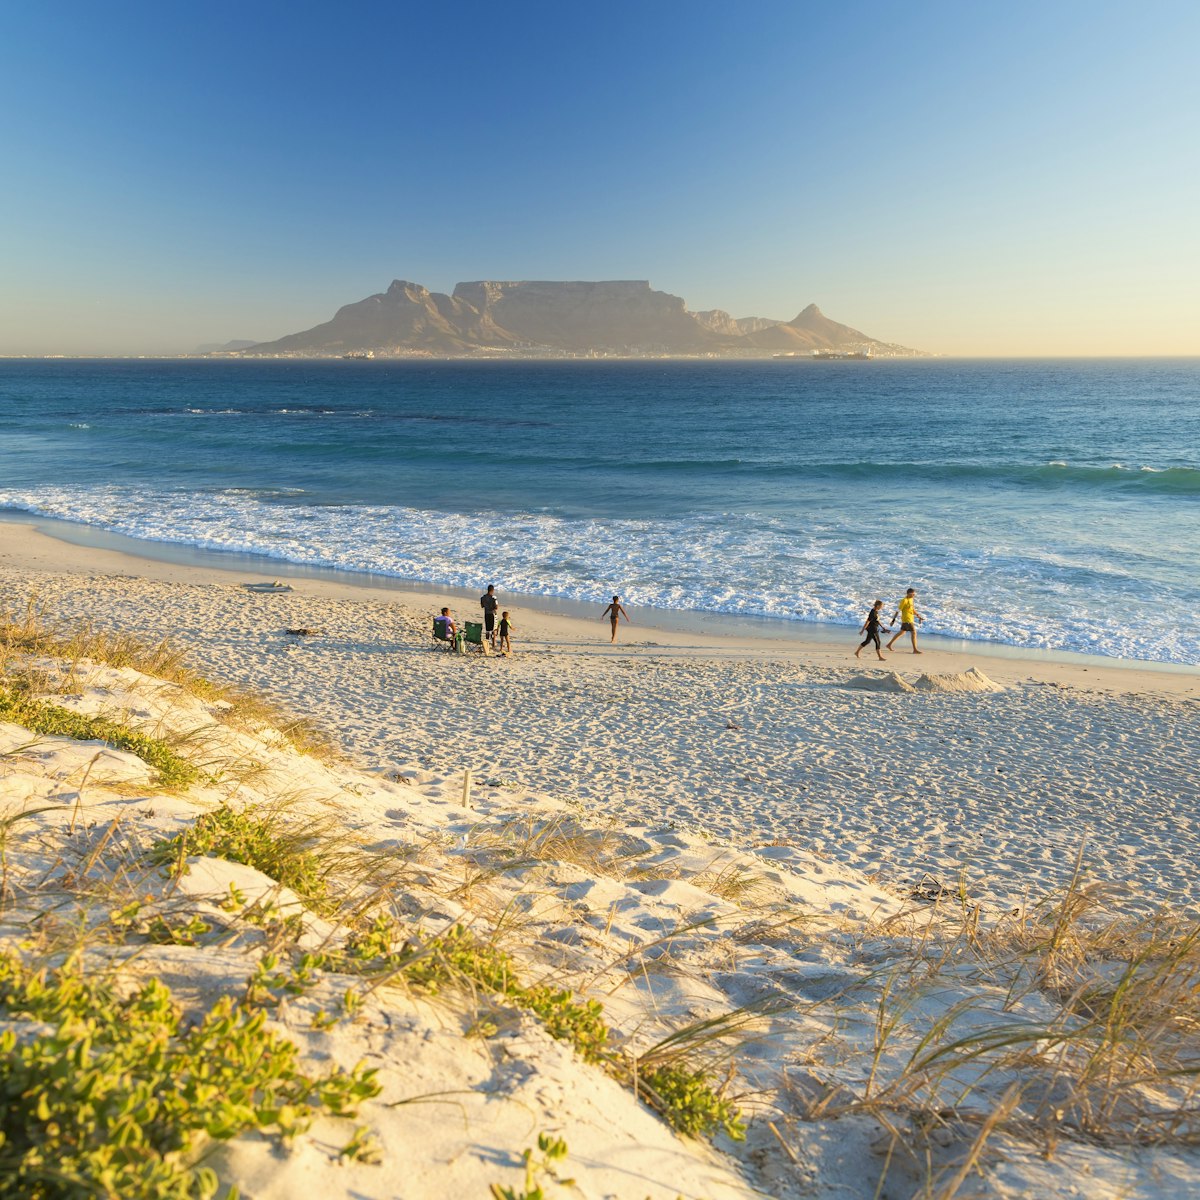 Bloubergstrand Beach with Table Mountain in background.